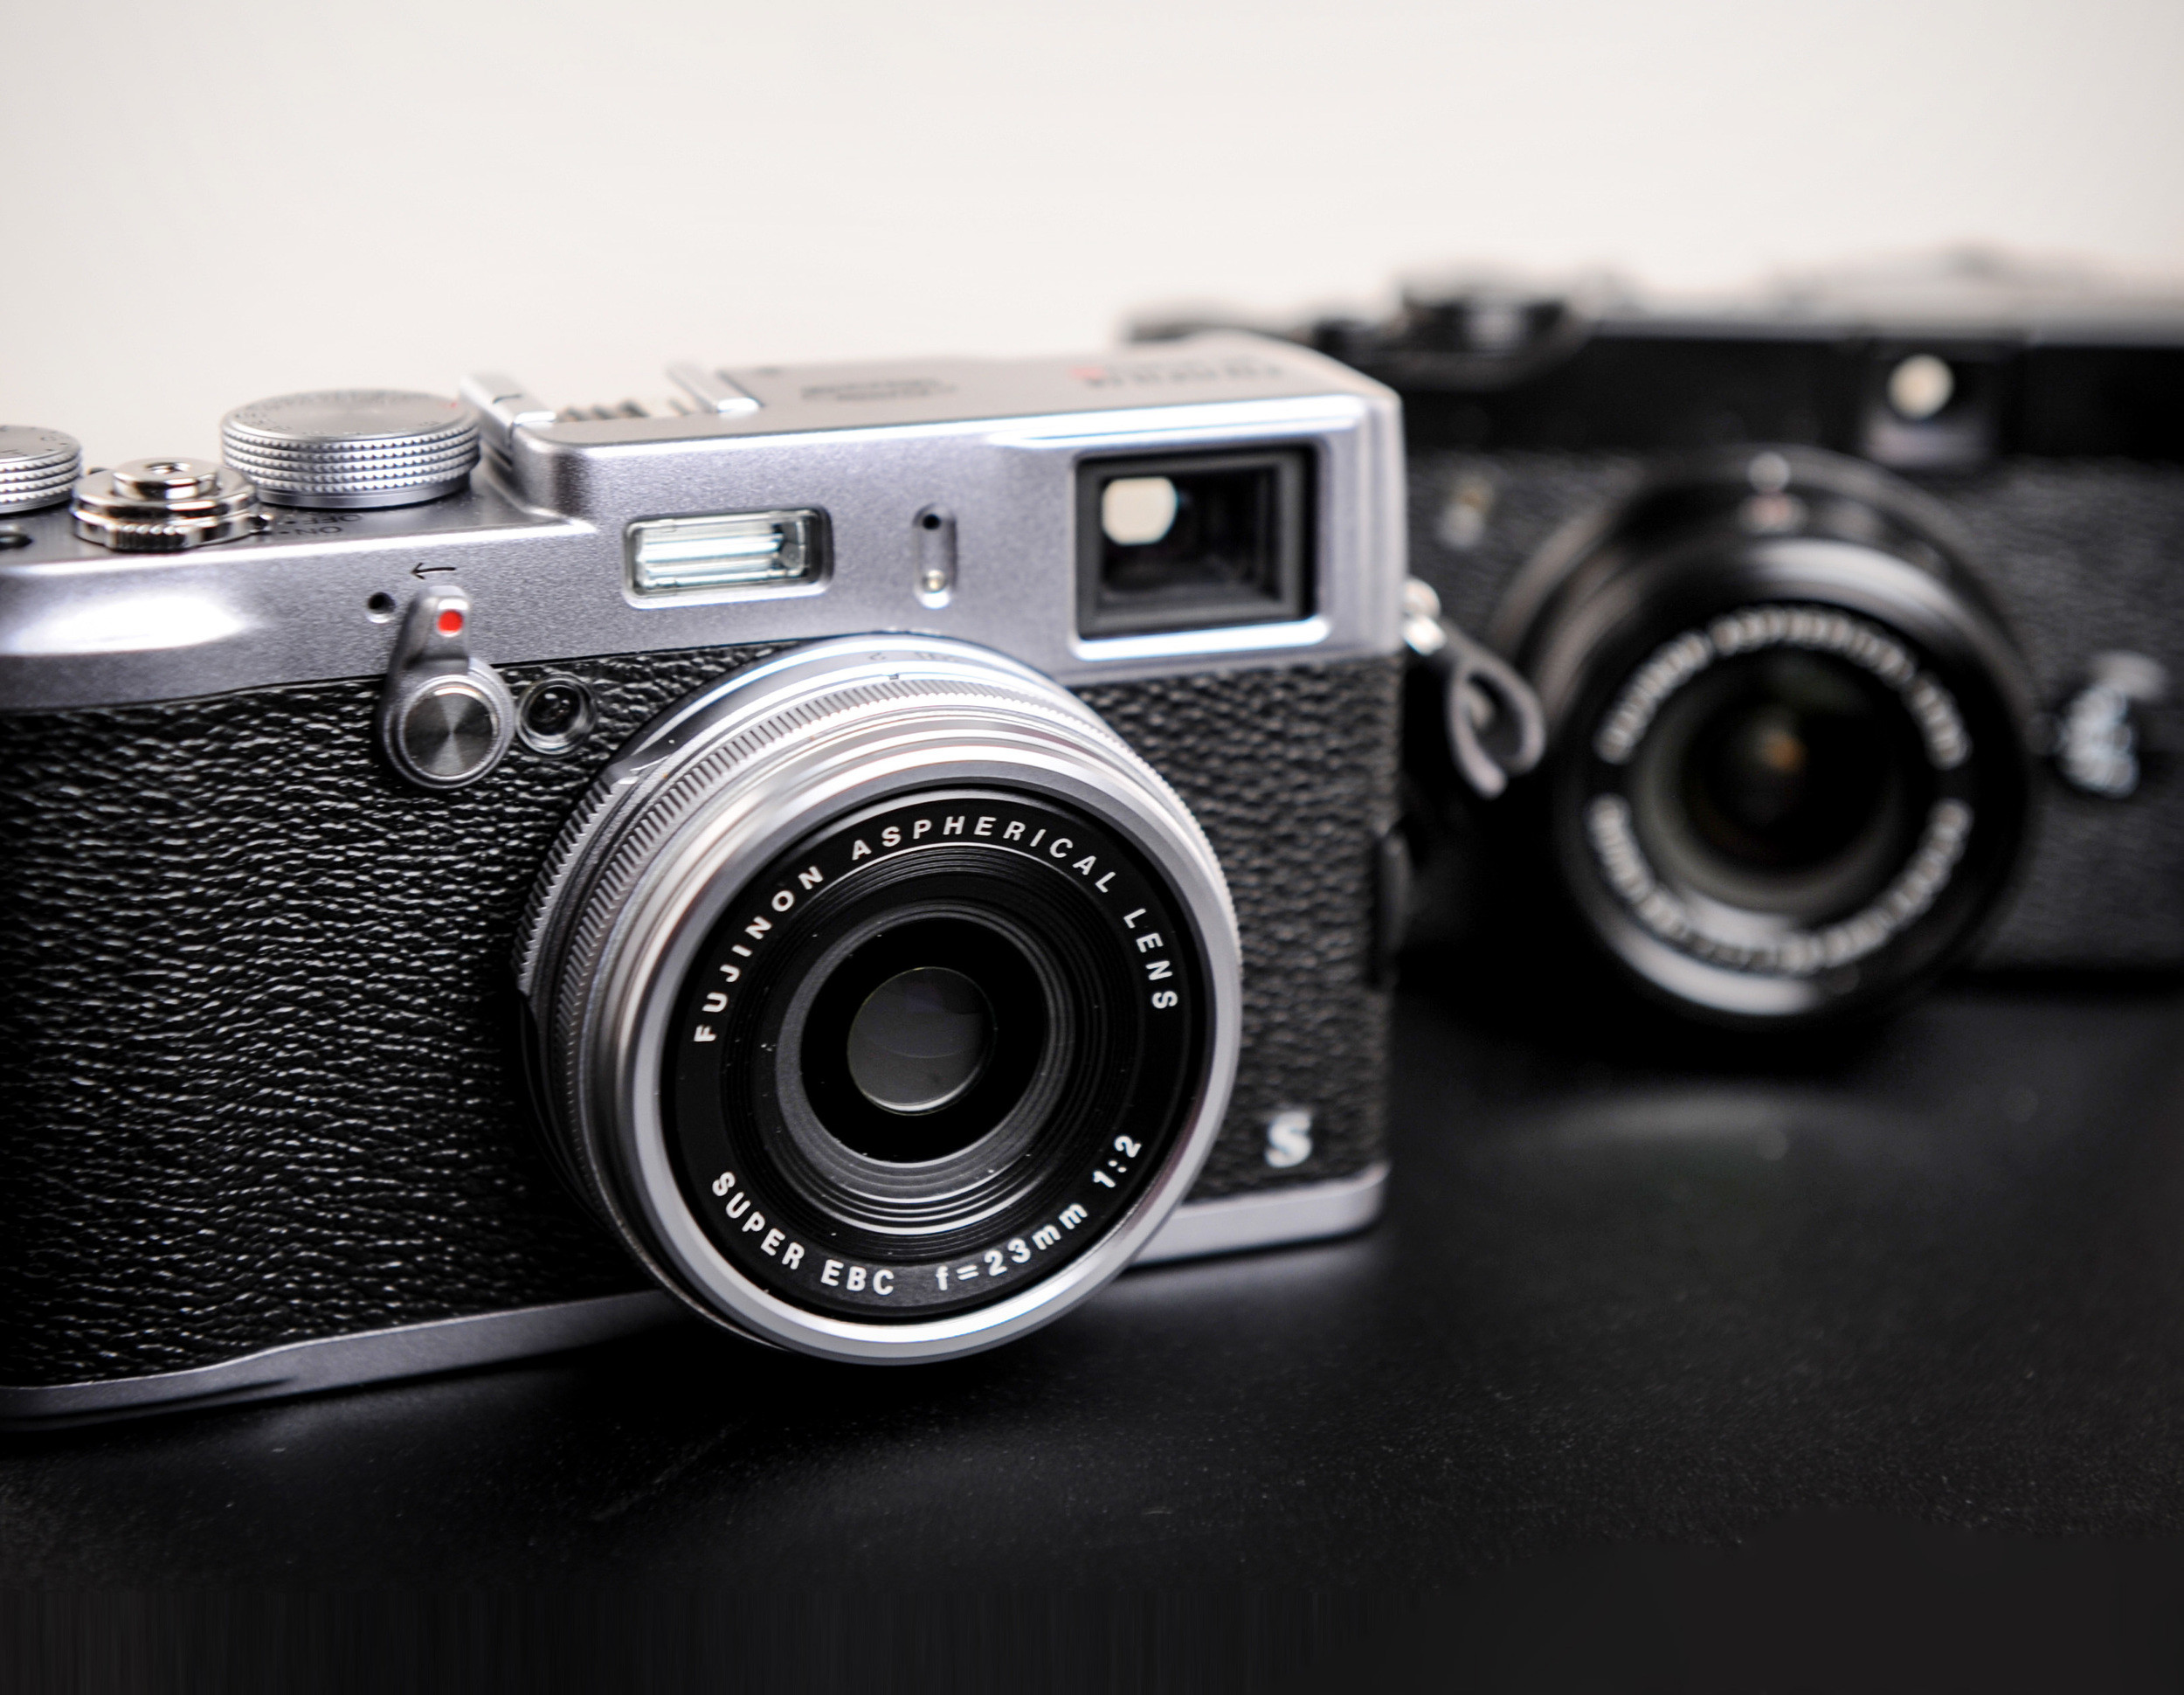 TIME FOR AN UPGRADE? X10 OR X100S — jfwPHOTO.com